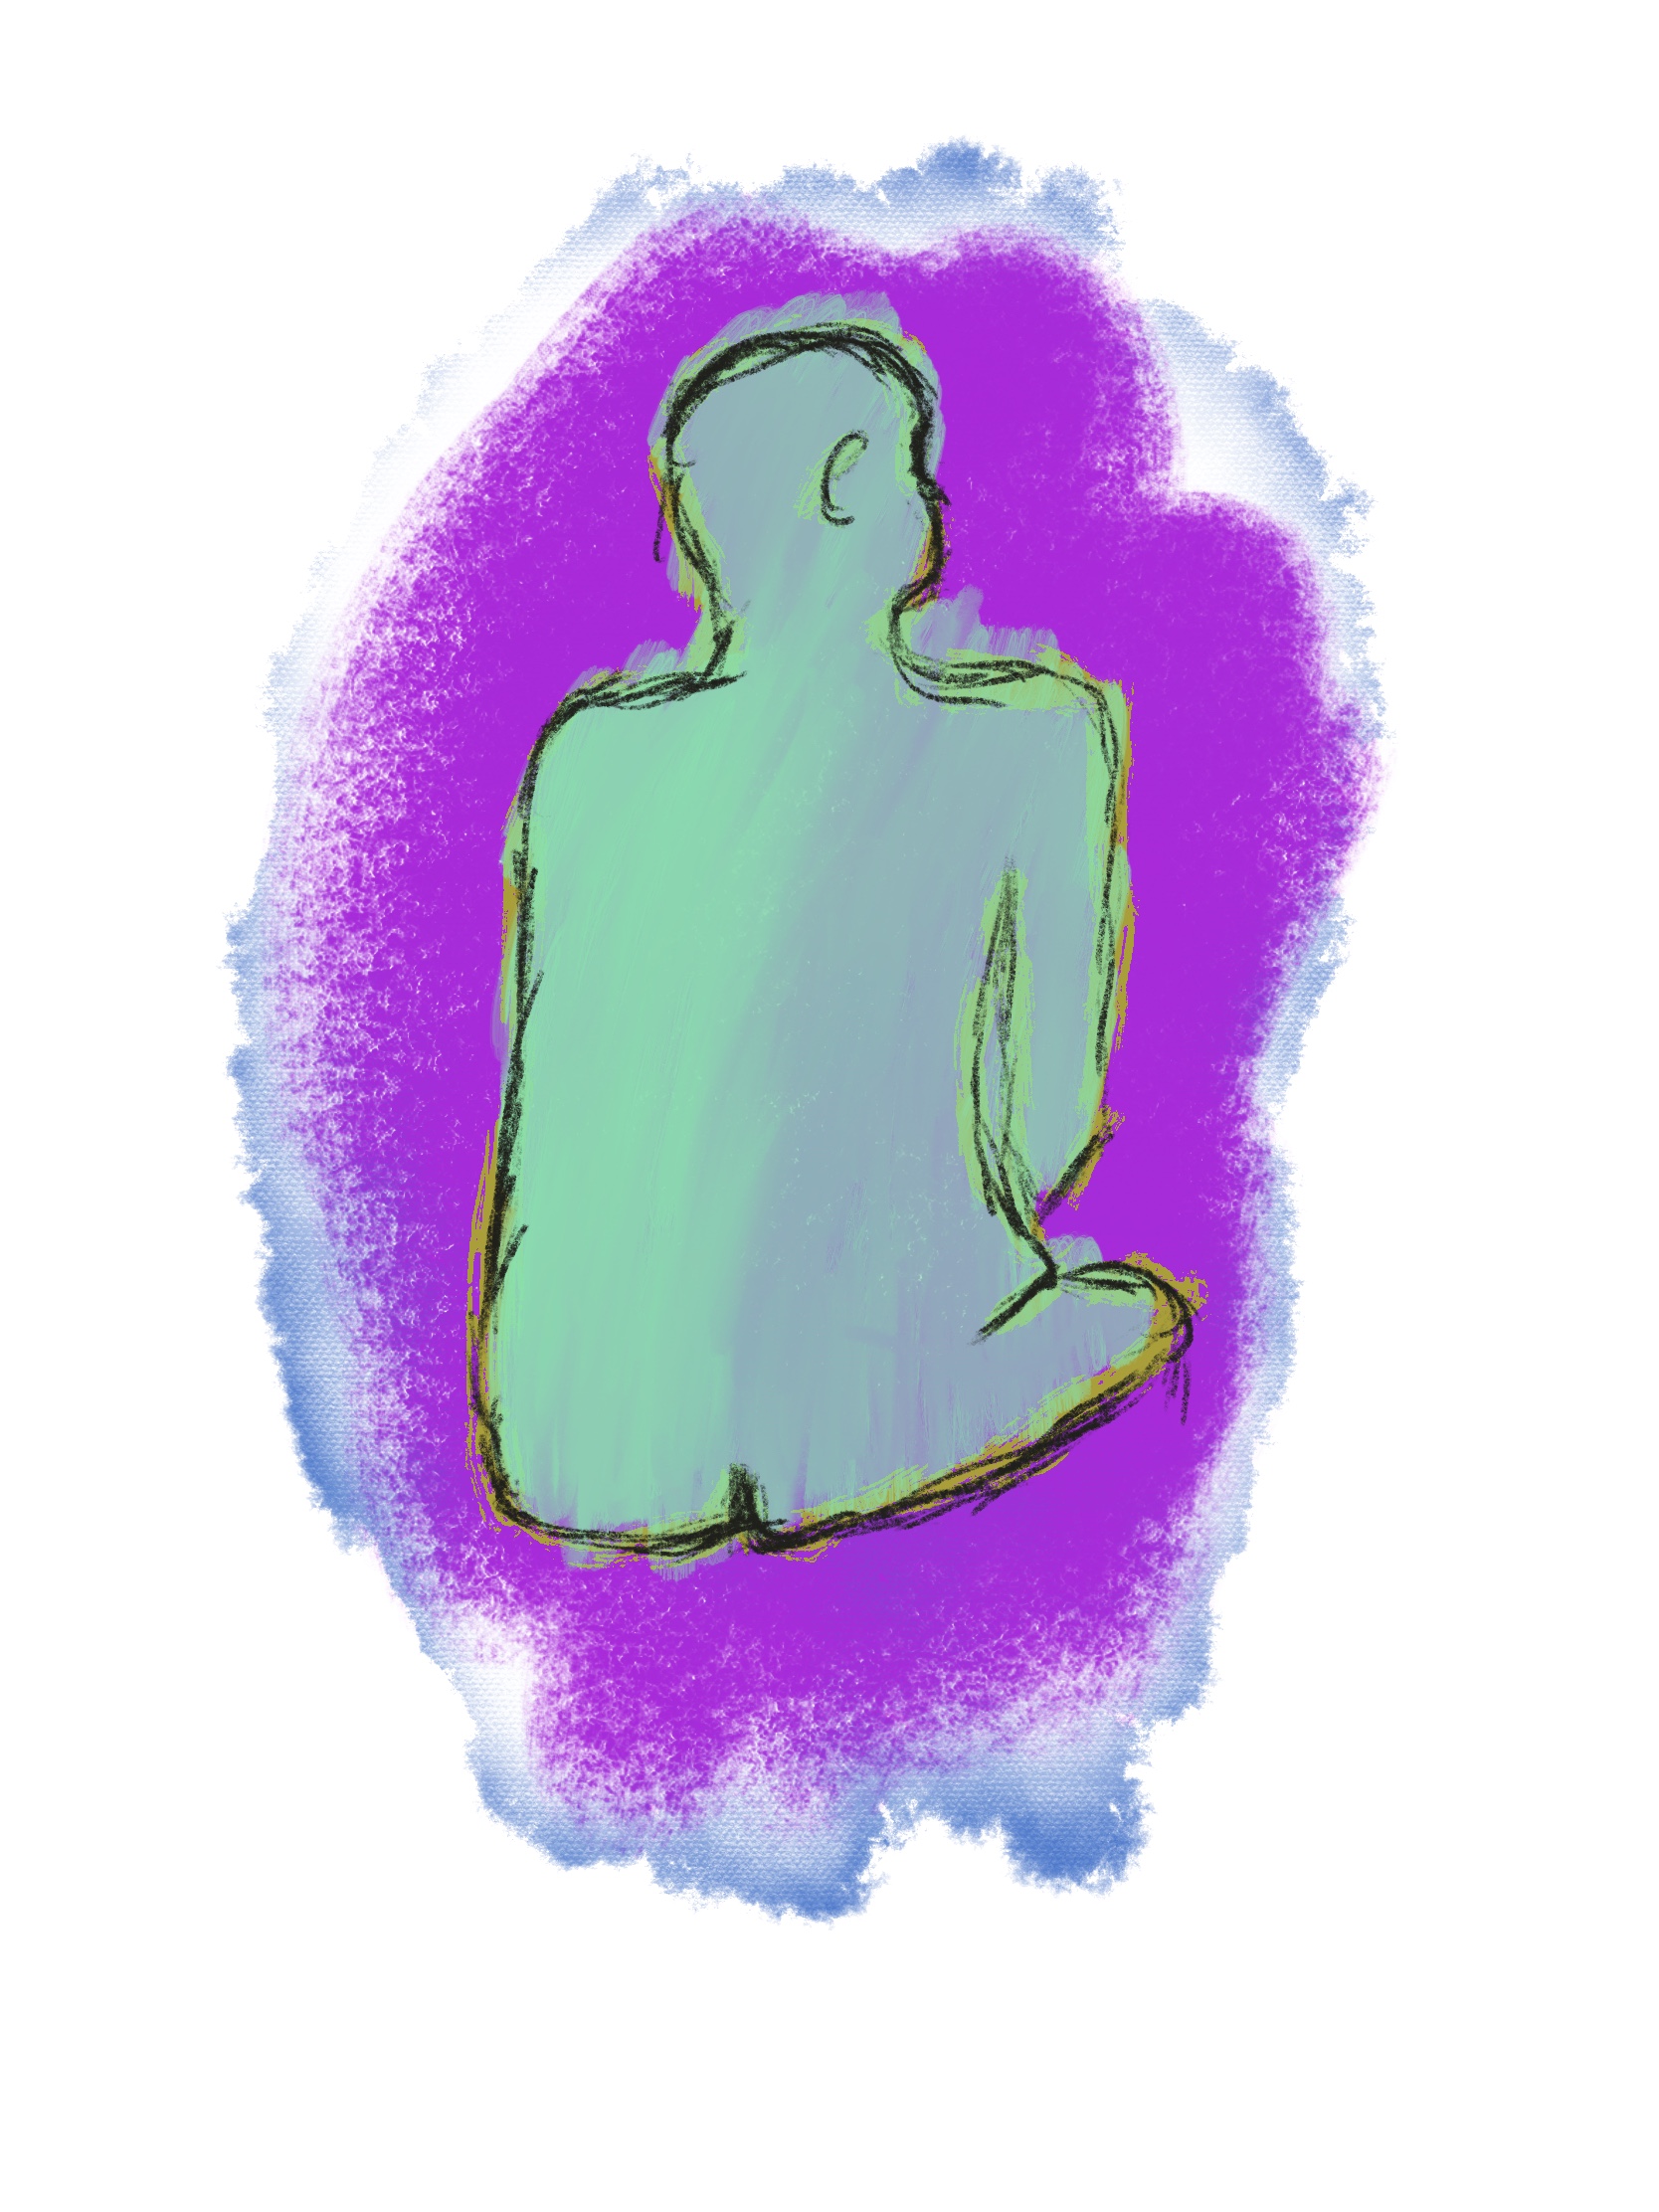 Sketch of a male form. They are green on a purple background with their back to the artist.